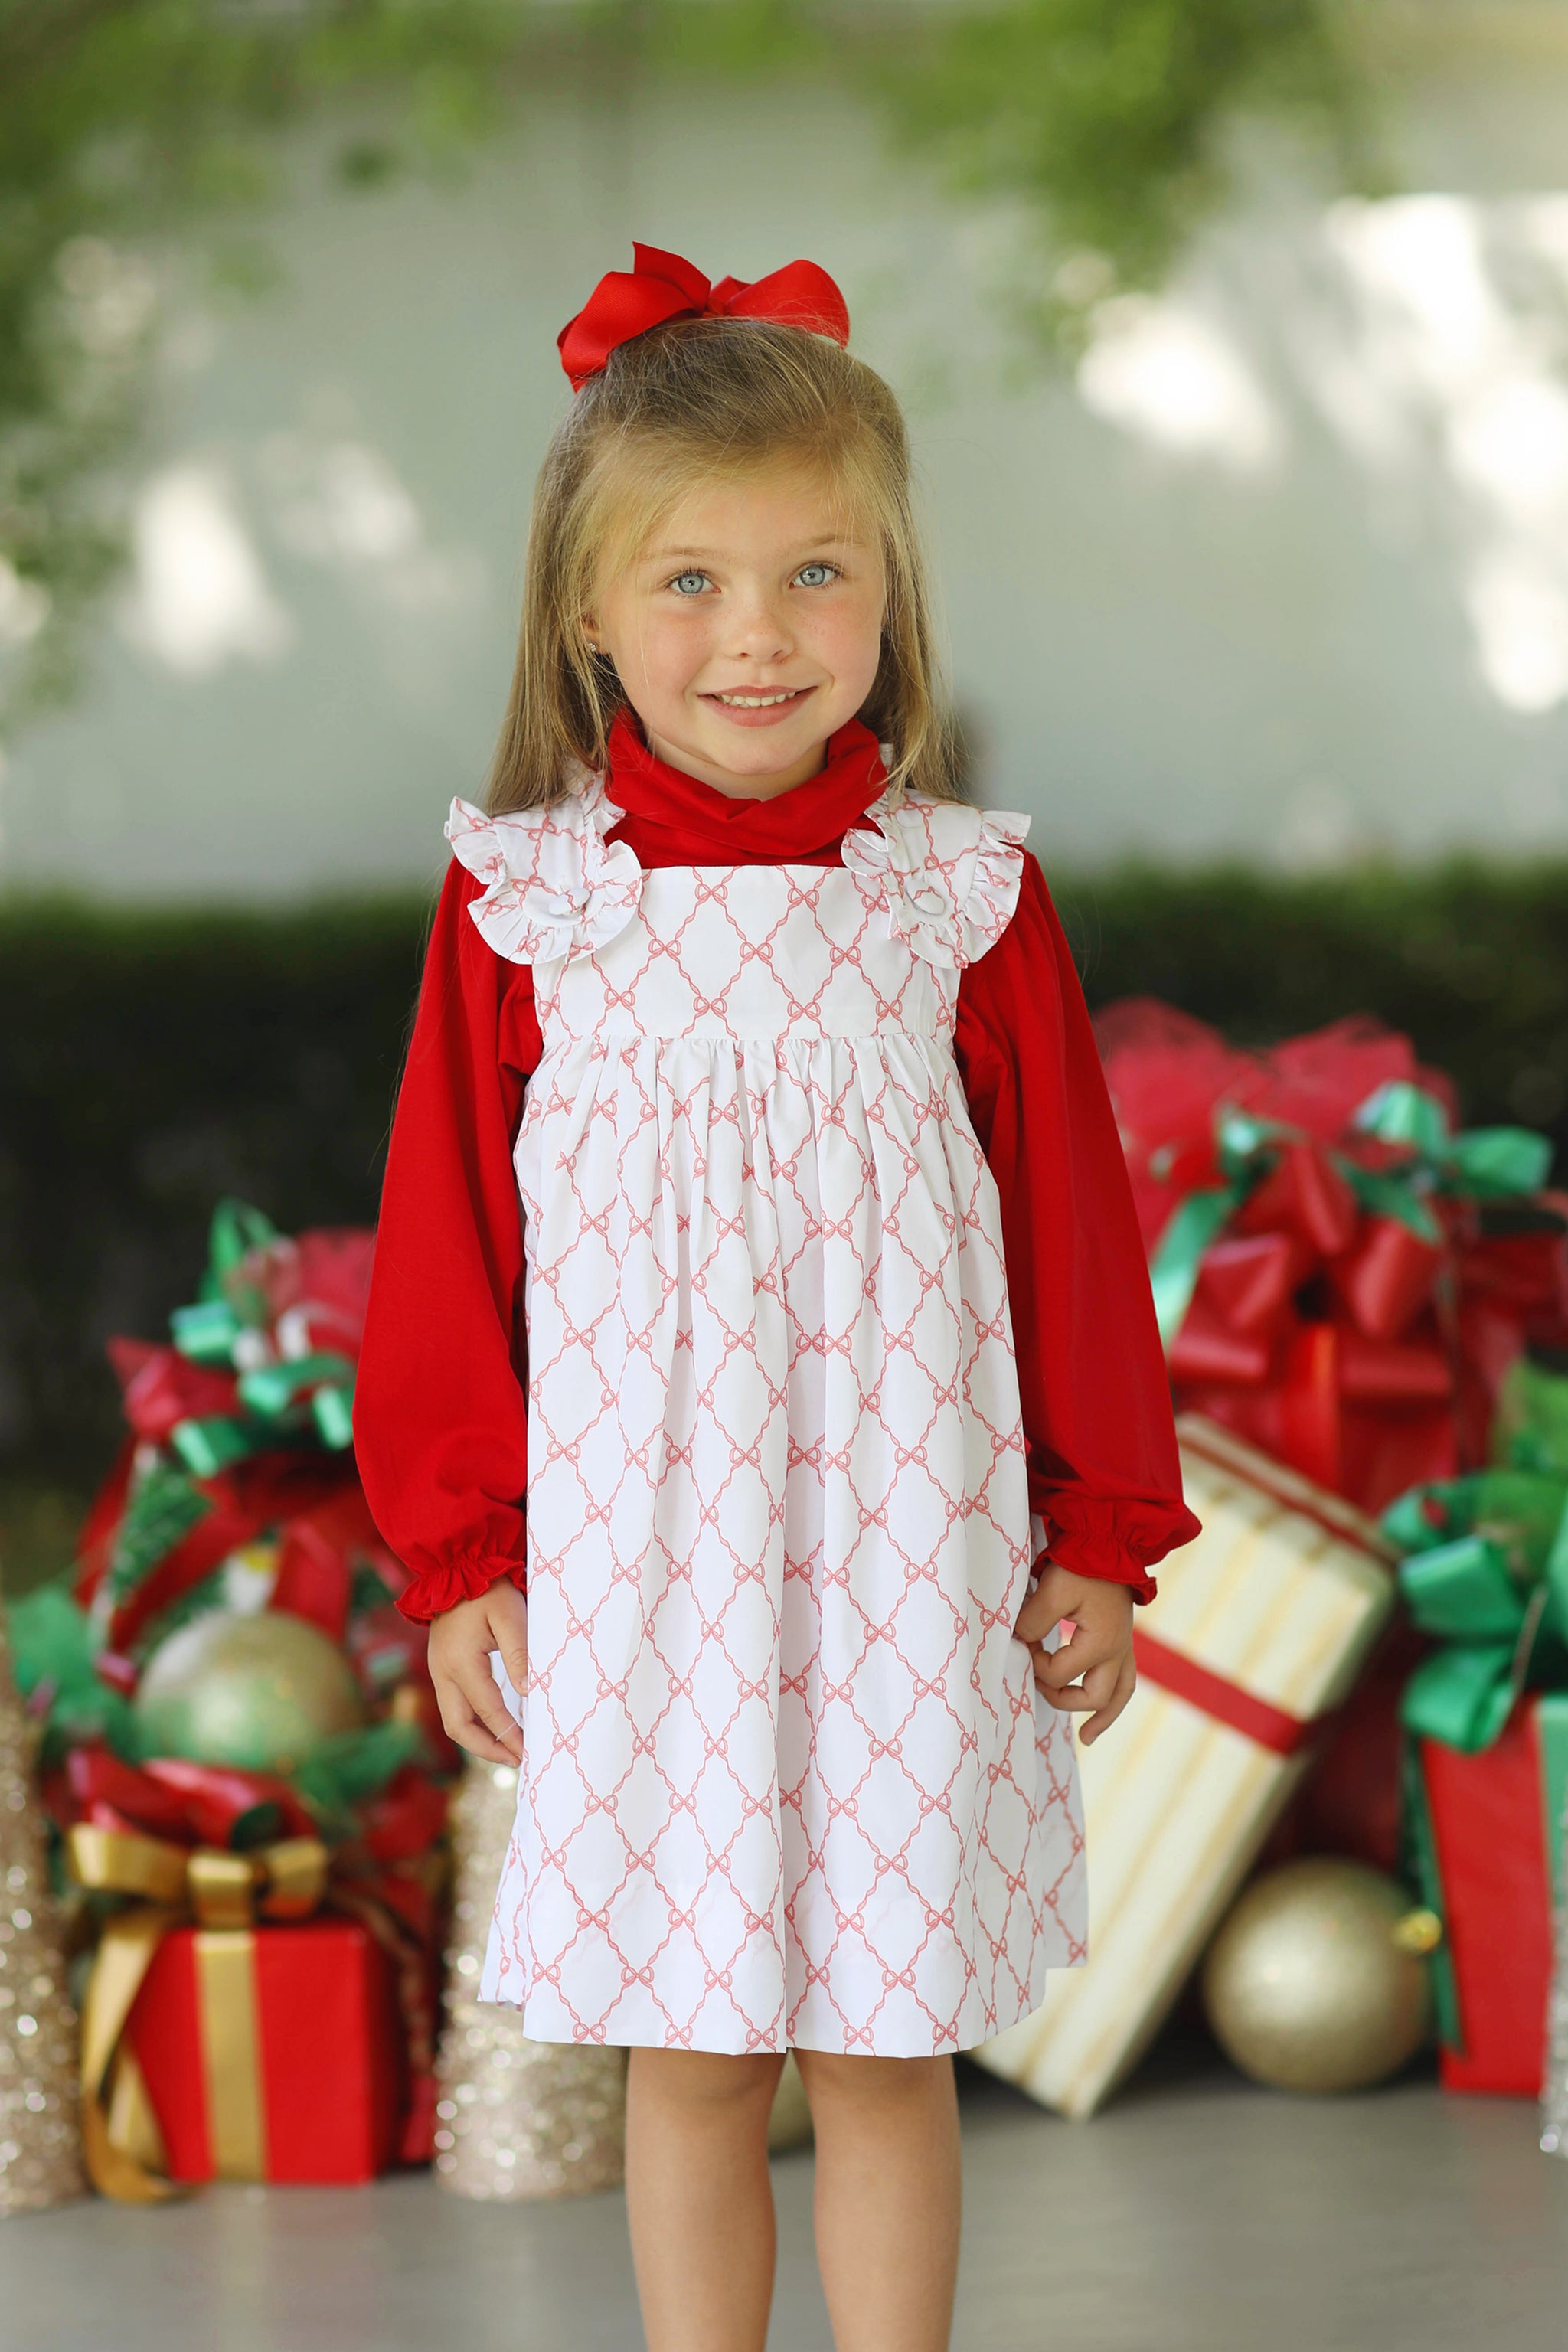 Girls Dresses – The Smocking Place